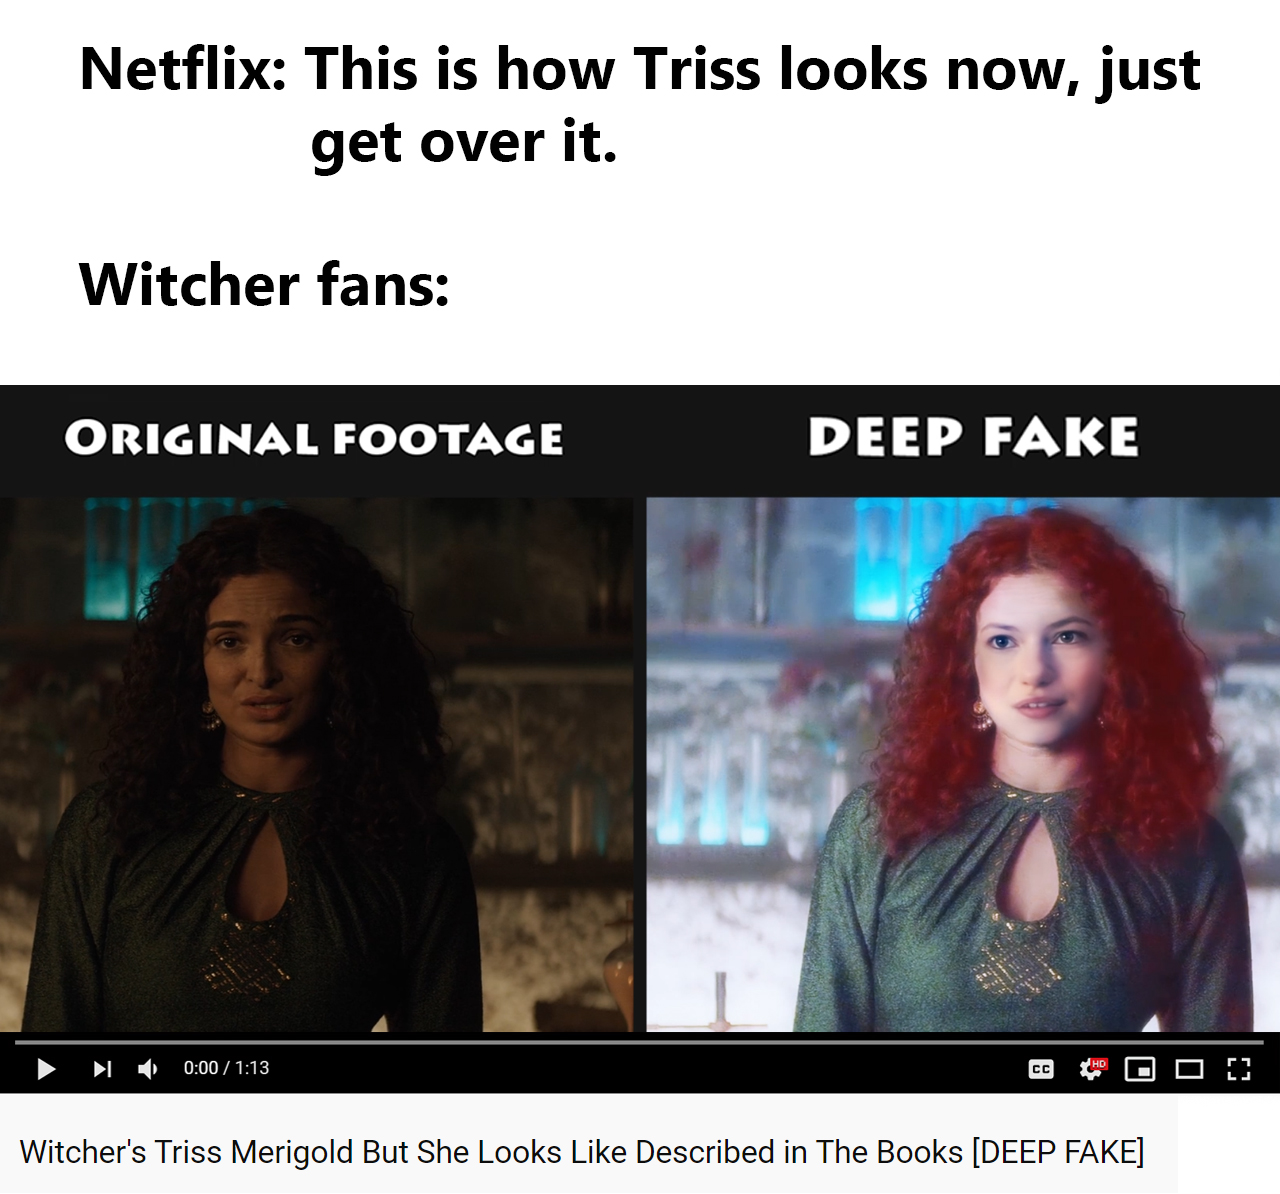 photo caption - Netflix This is how Triss looks now, just get over it. Witcher fans Original Footage Deep Fake Witcher's Triss Merigold But She Looks Described in The Books Deep Fake